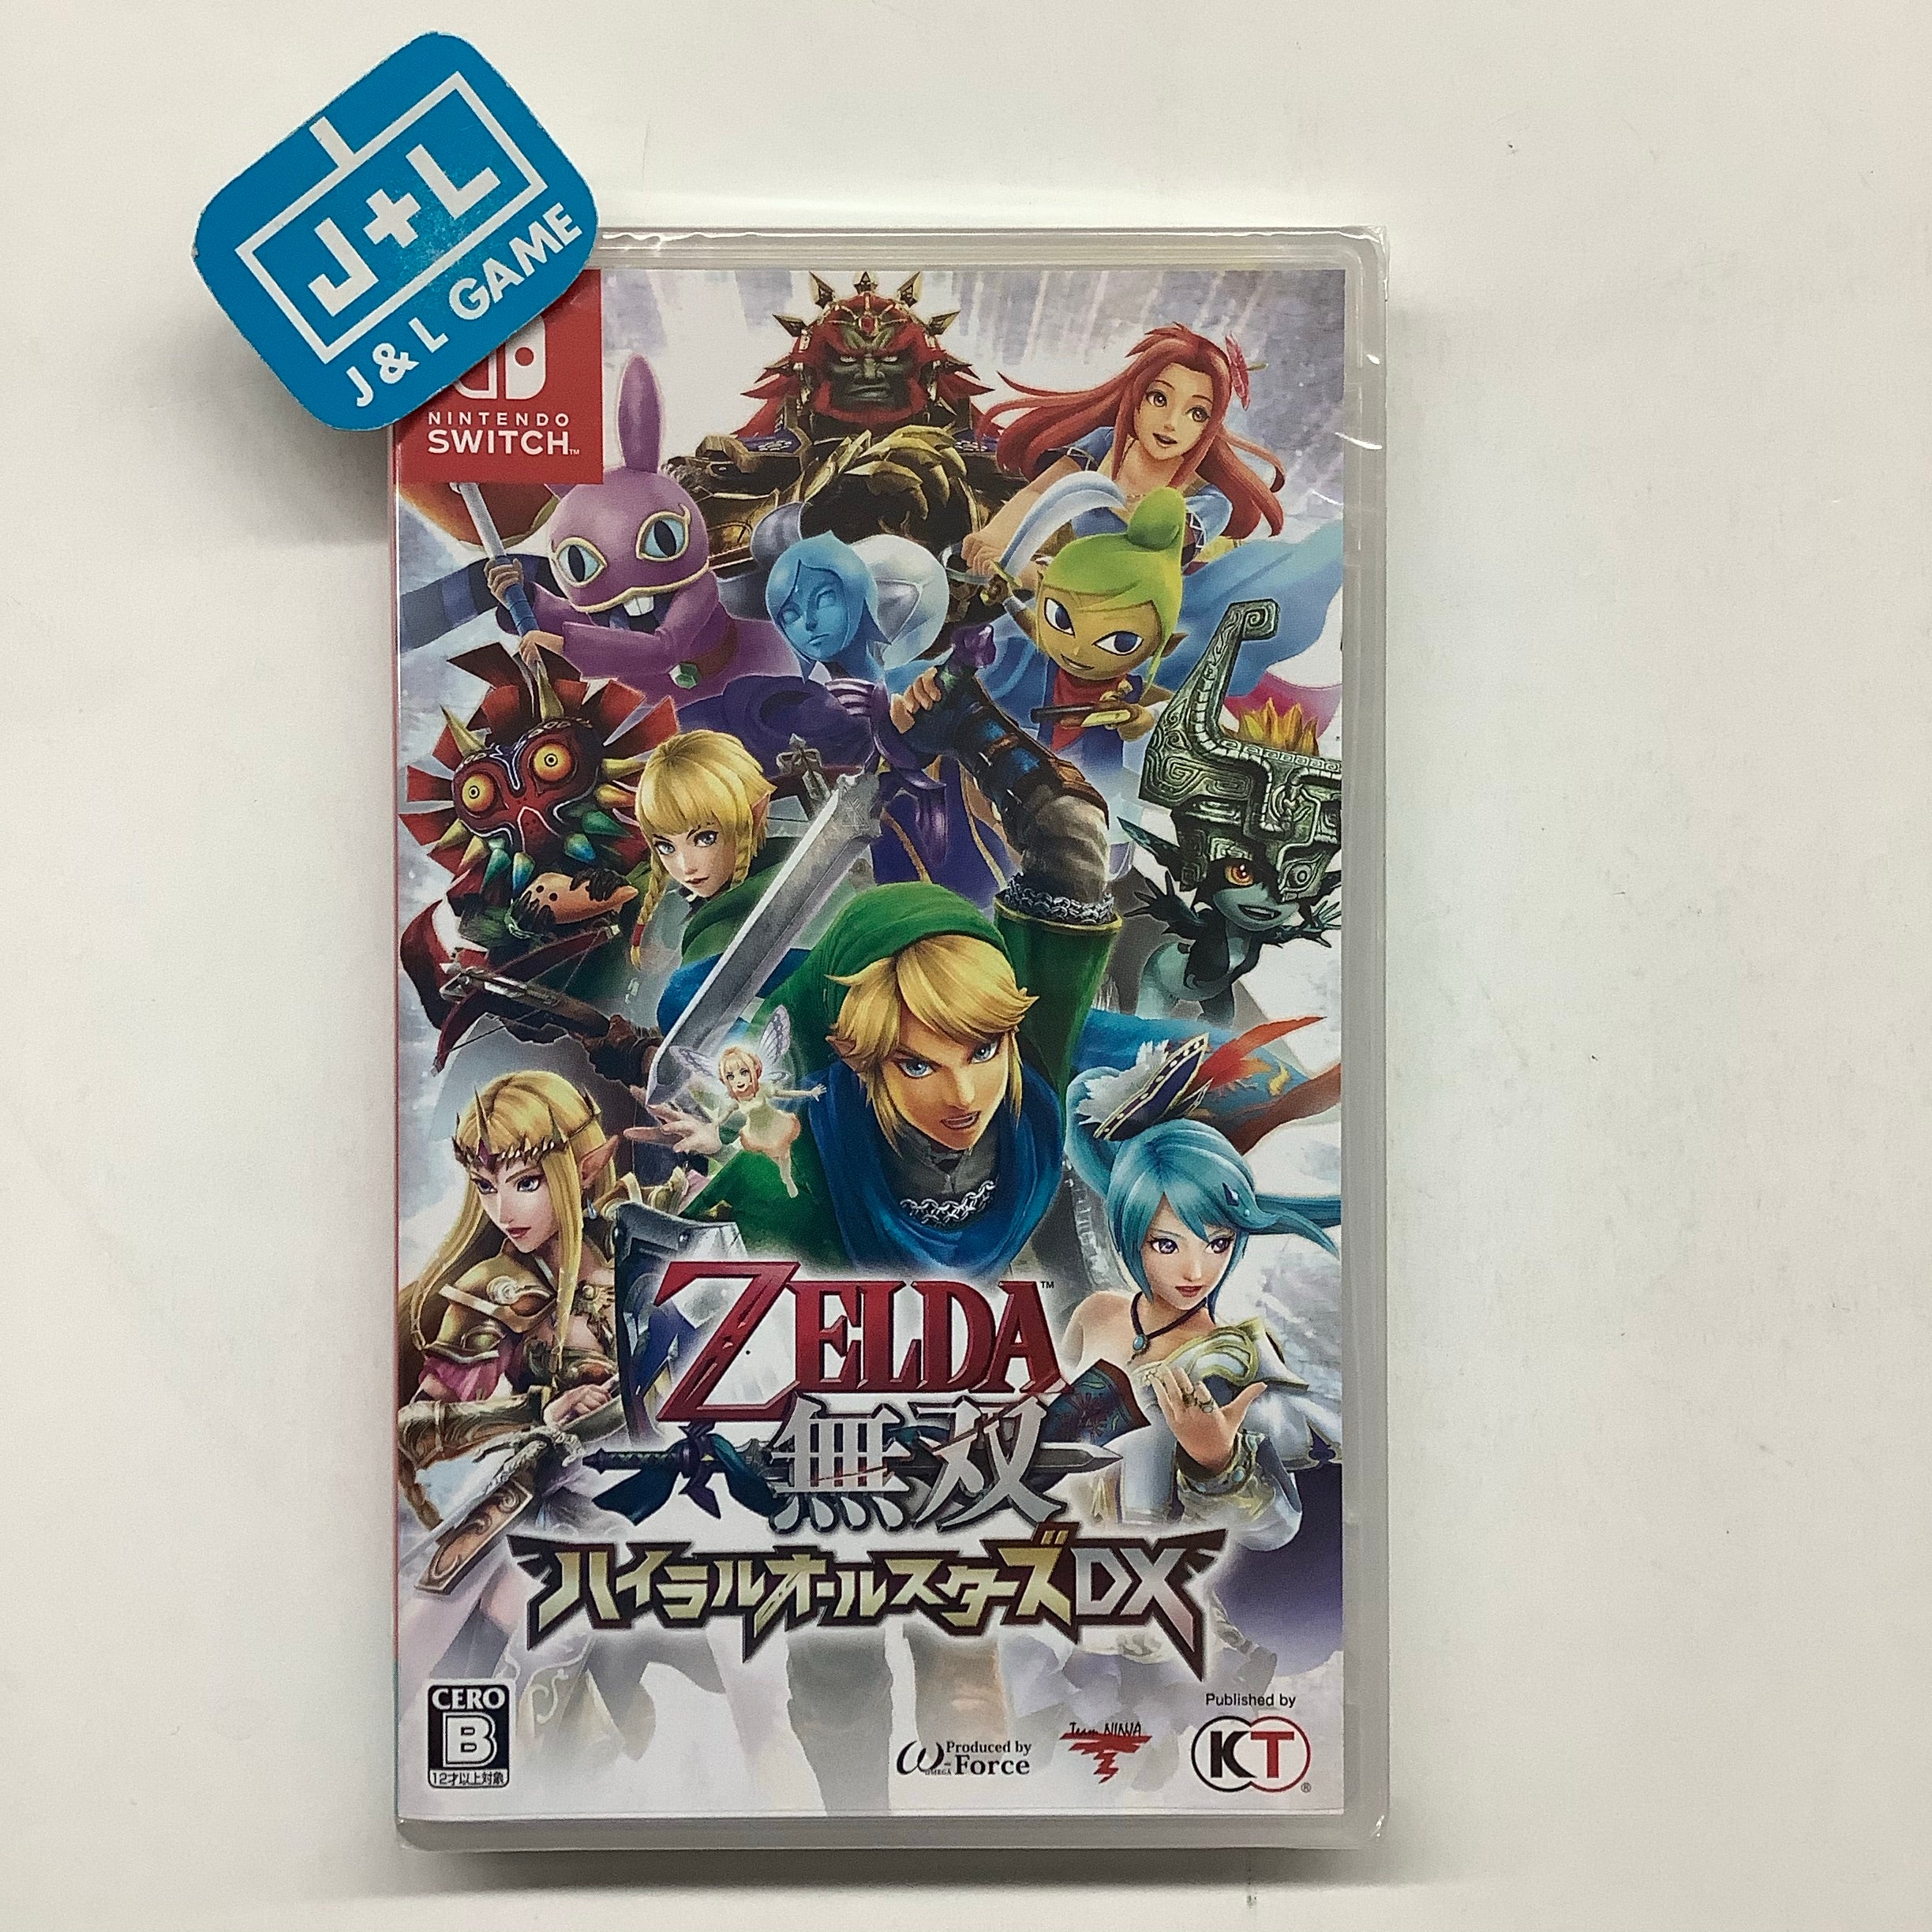 Switch file sizes: Hyrule Warriors: Definitive Edition and more